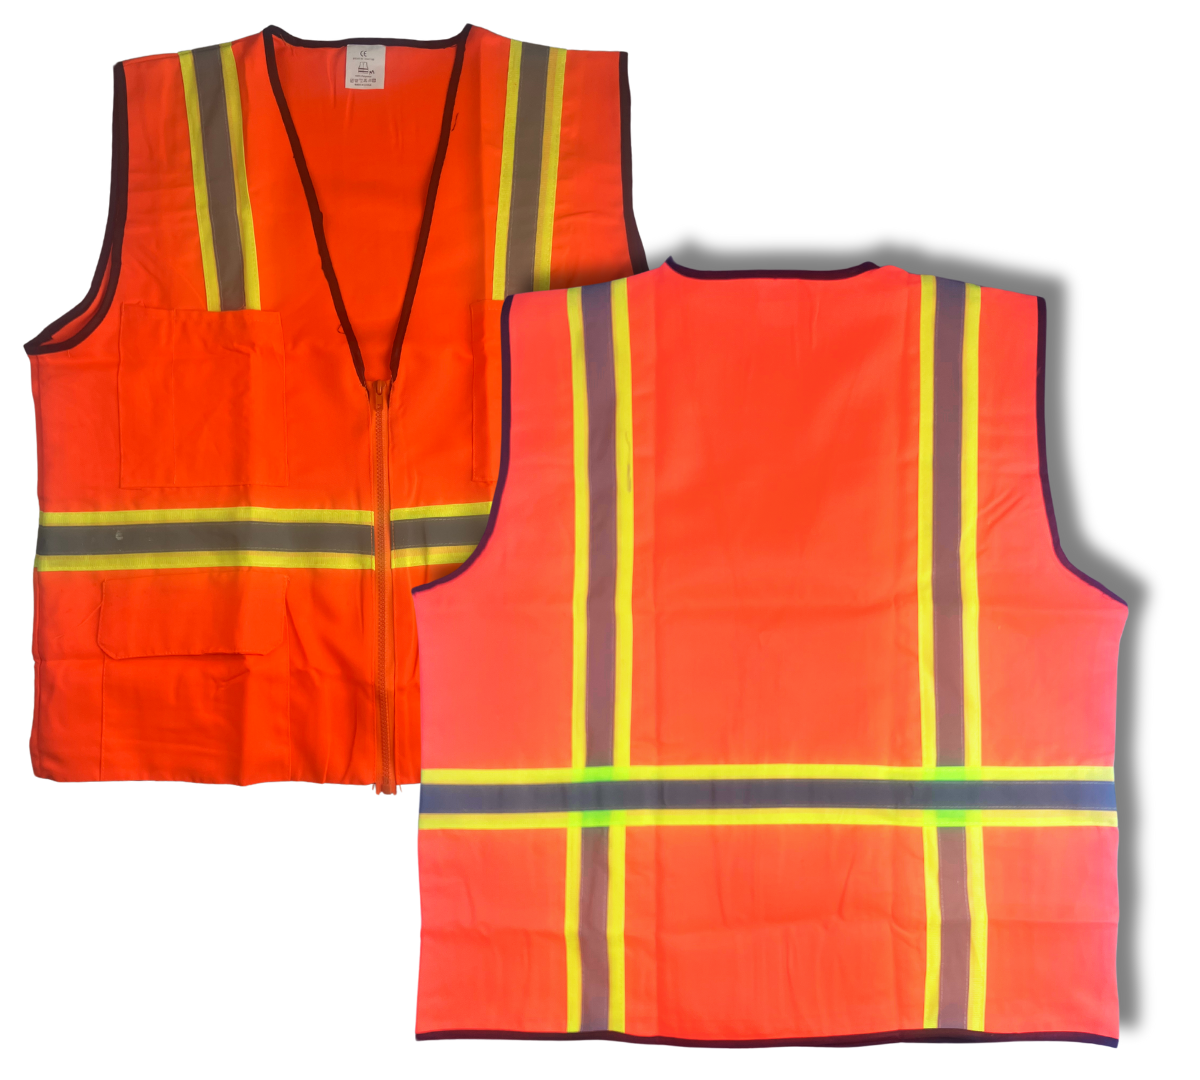 Bright Orange Safety Vest with Reflective Stripes - 2X Large  - SF-92718